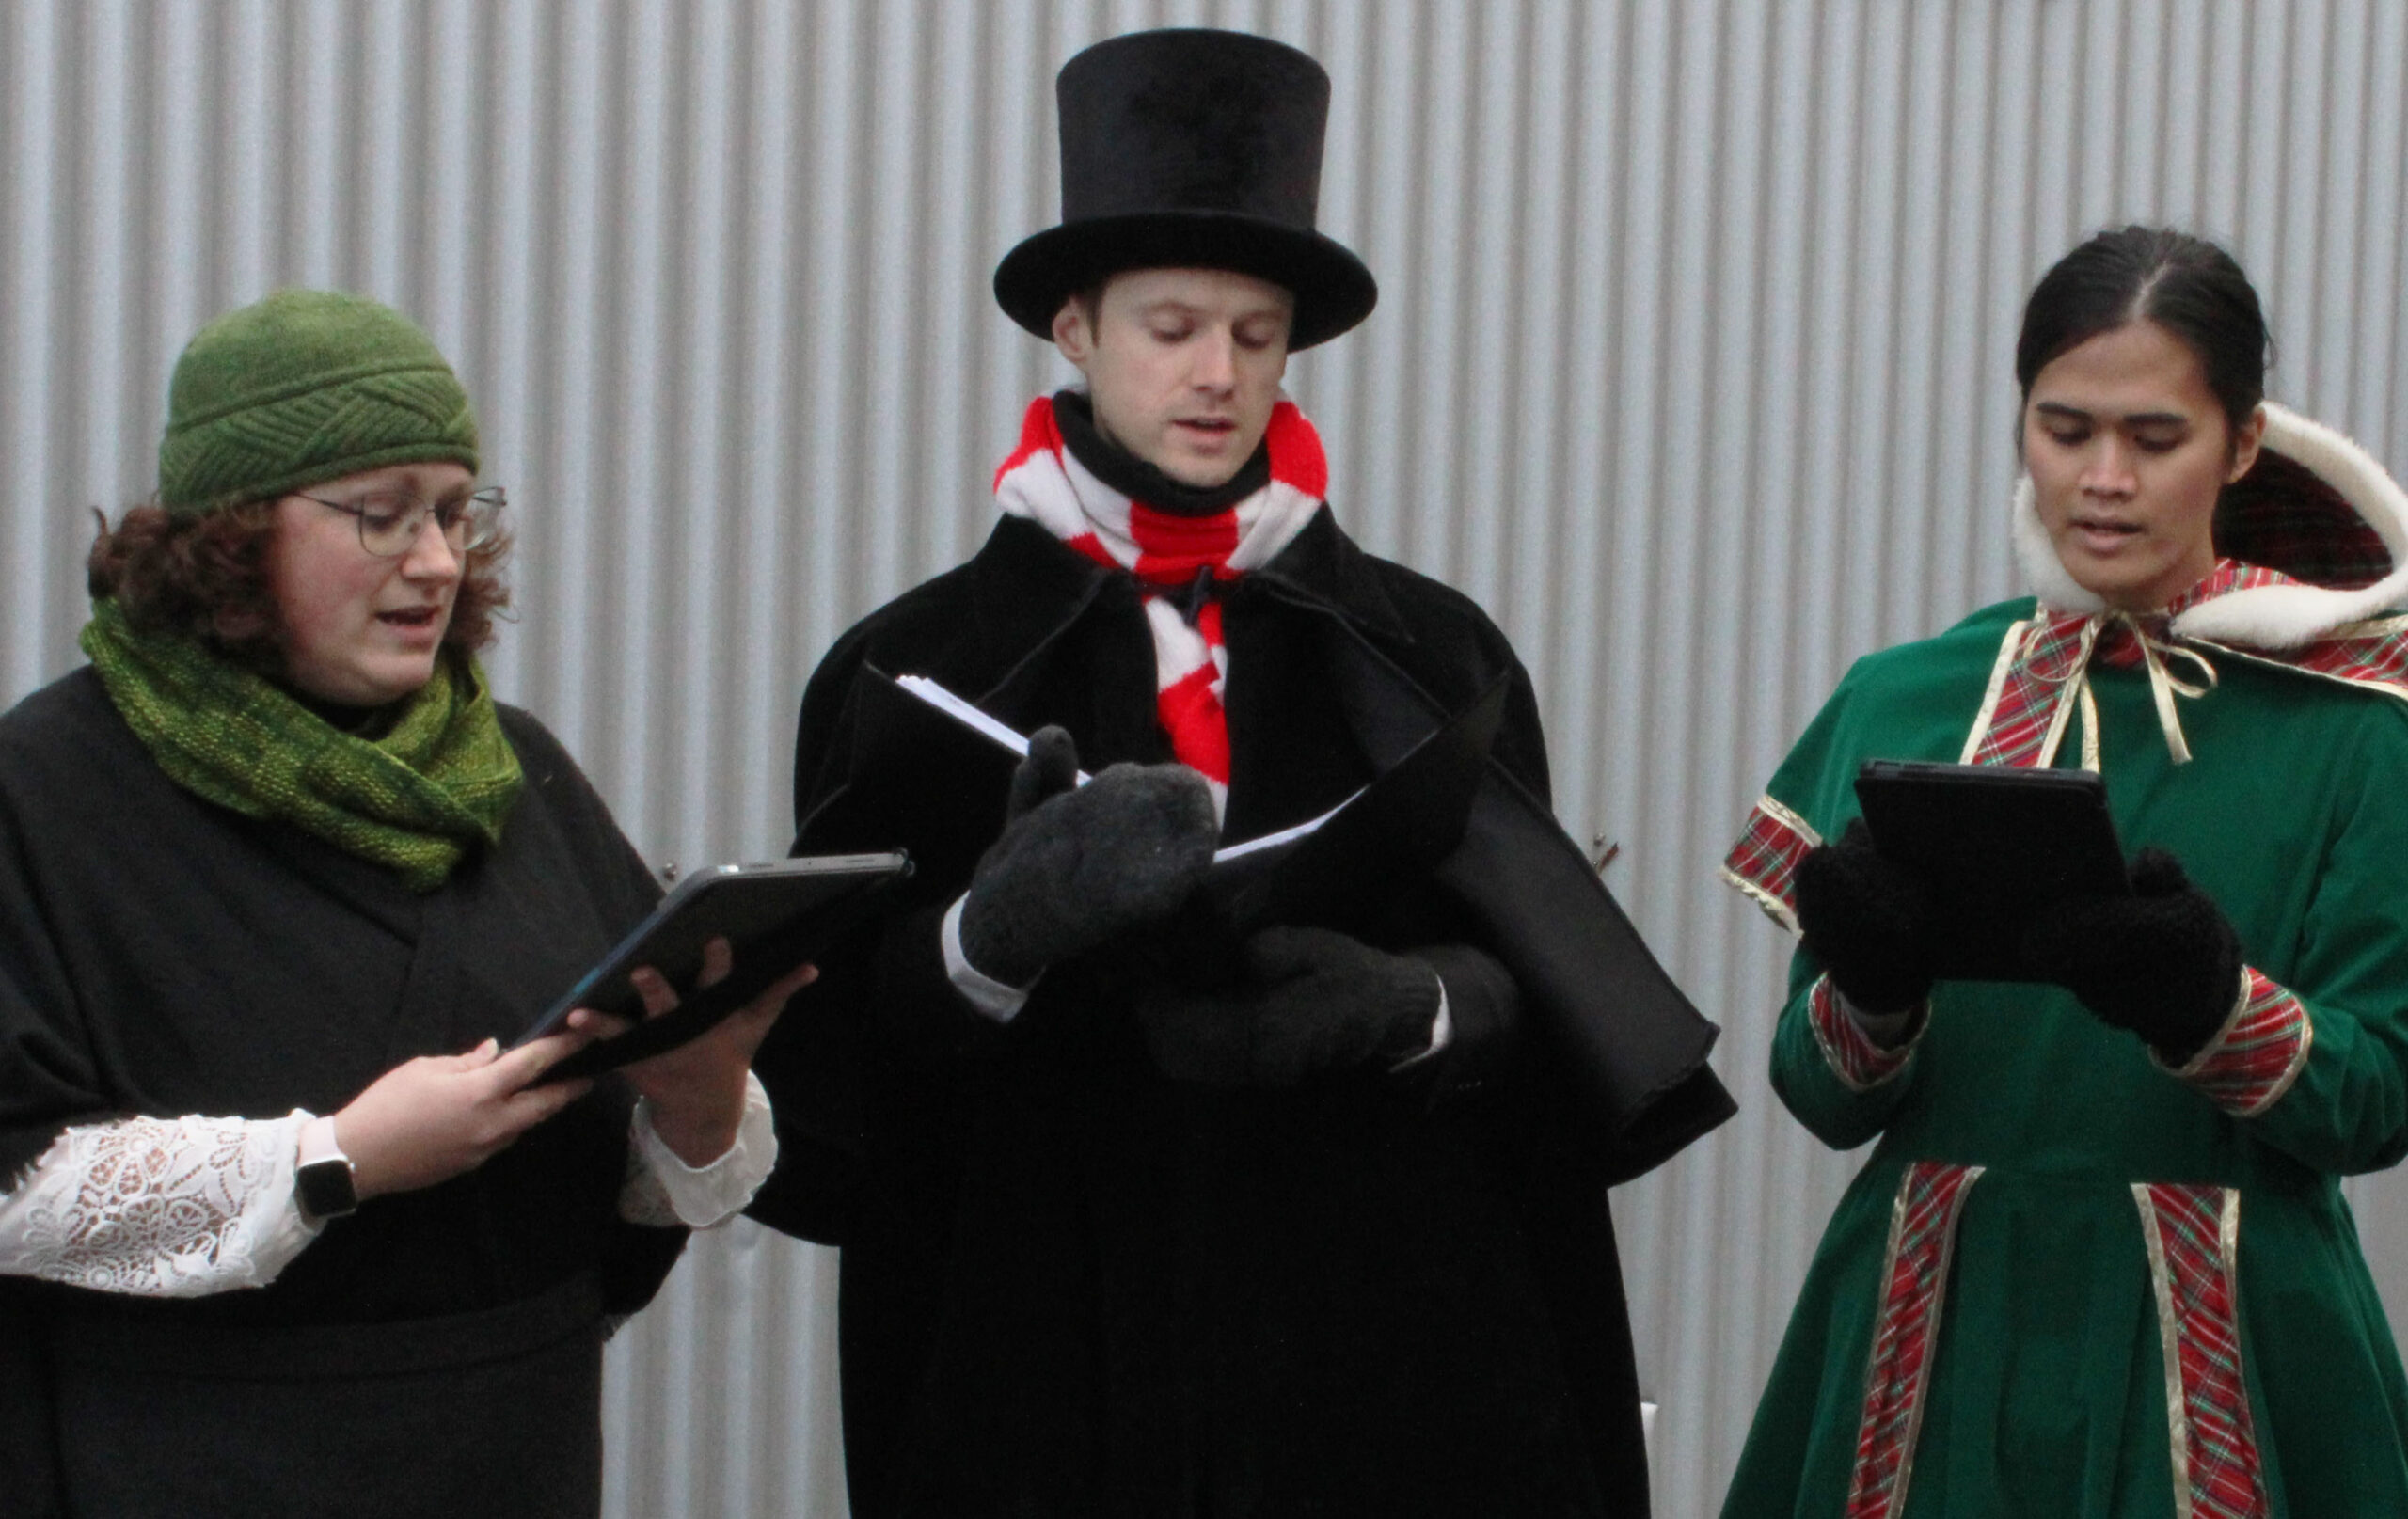 Three people standing in line horizontally, reading music as they sing.